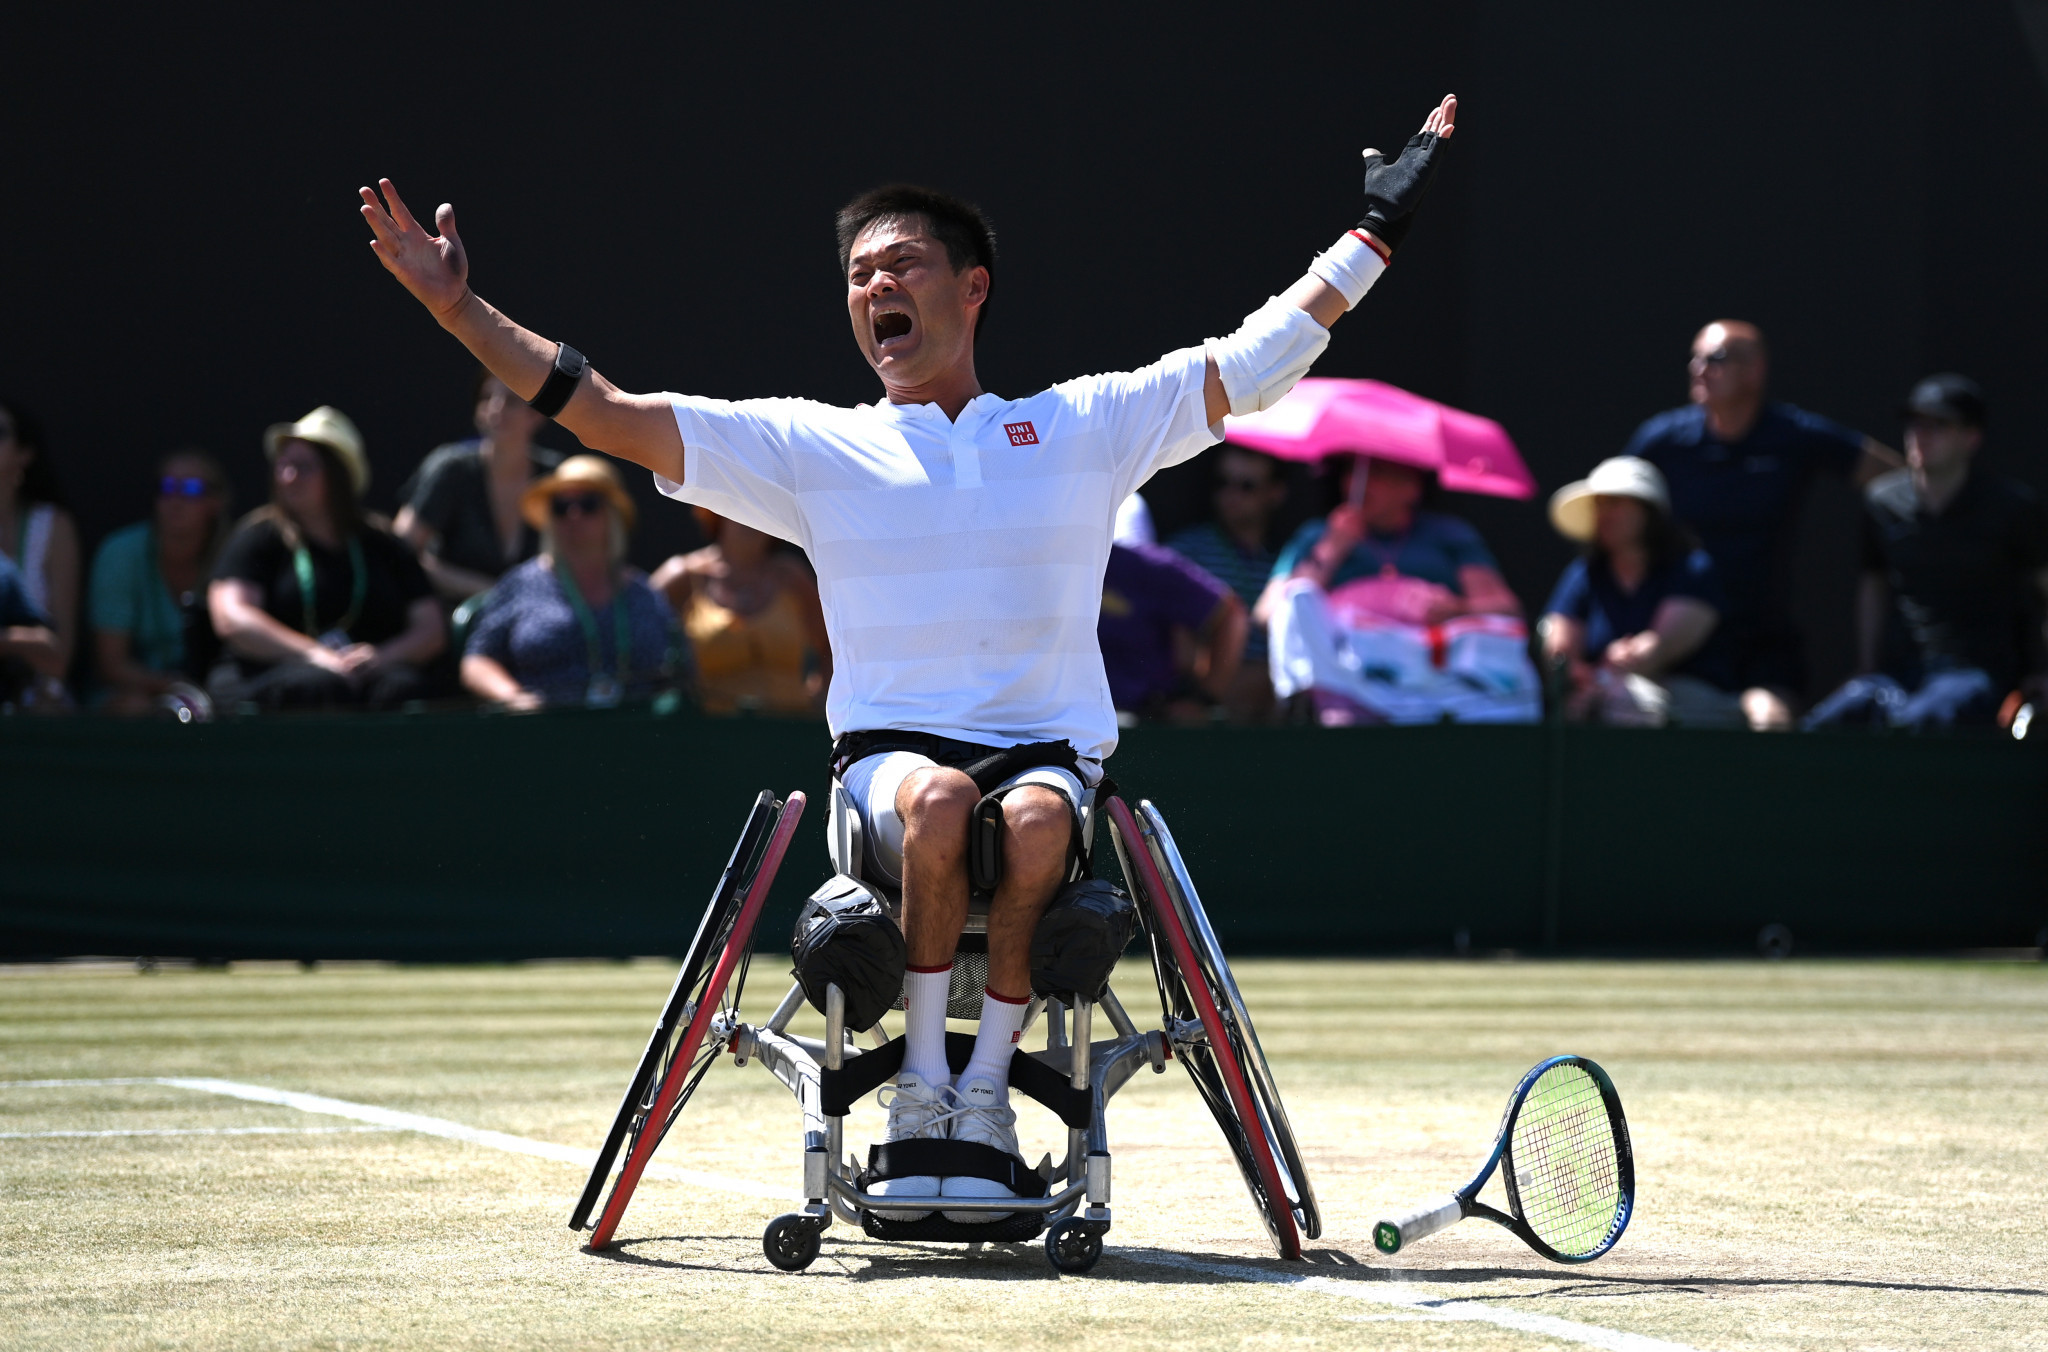 Shingo Kunieda won the Golden Slam after winning the Paralympic gold medal and four consecutive Grand Slams from the 2021 US Open to the 2022 Wimbledon ©Getty Images